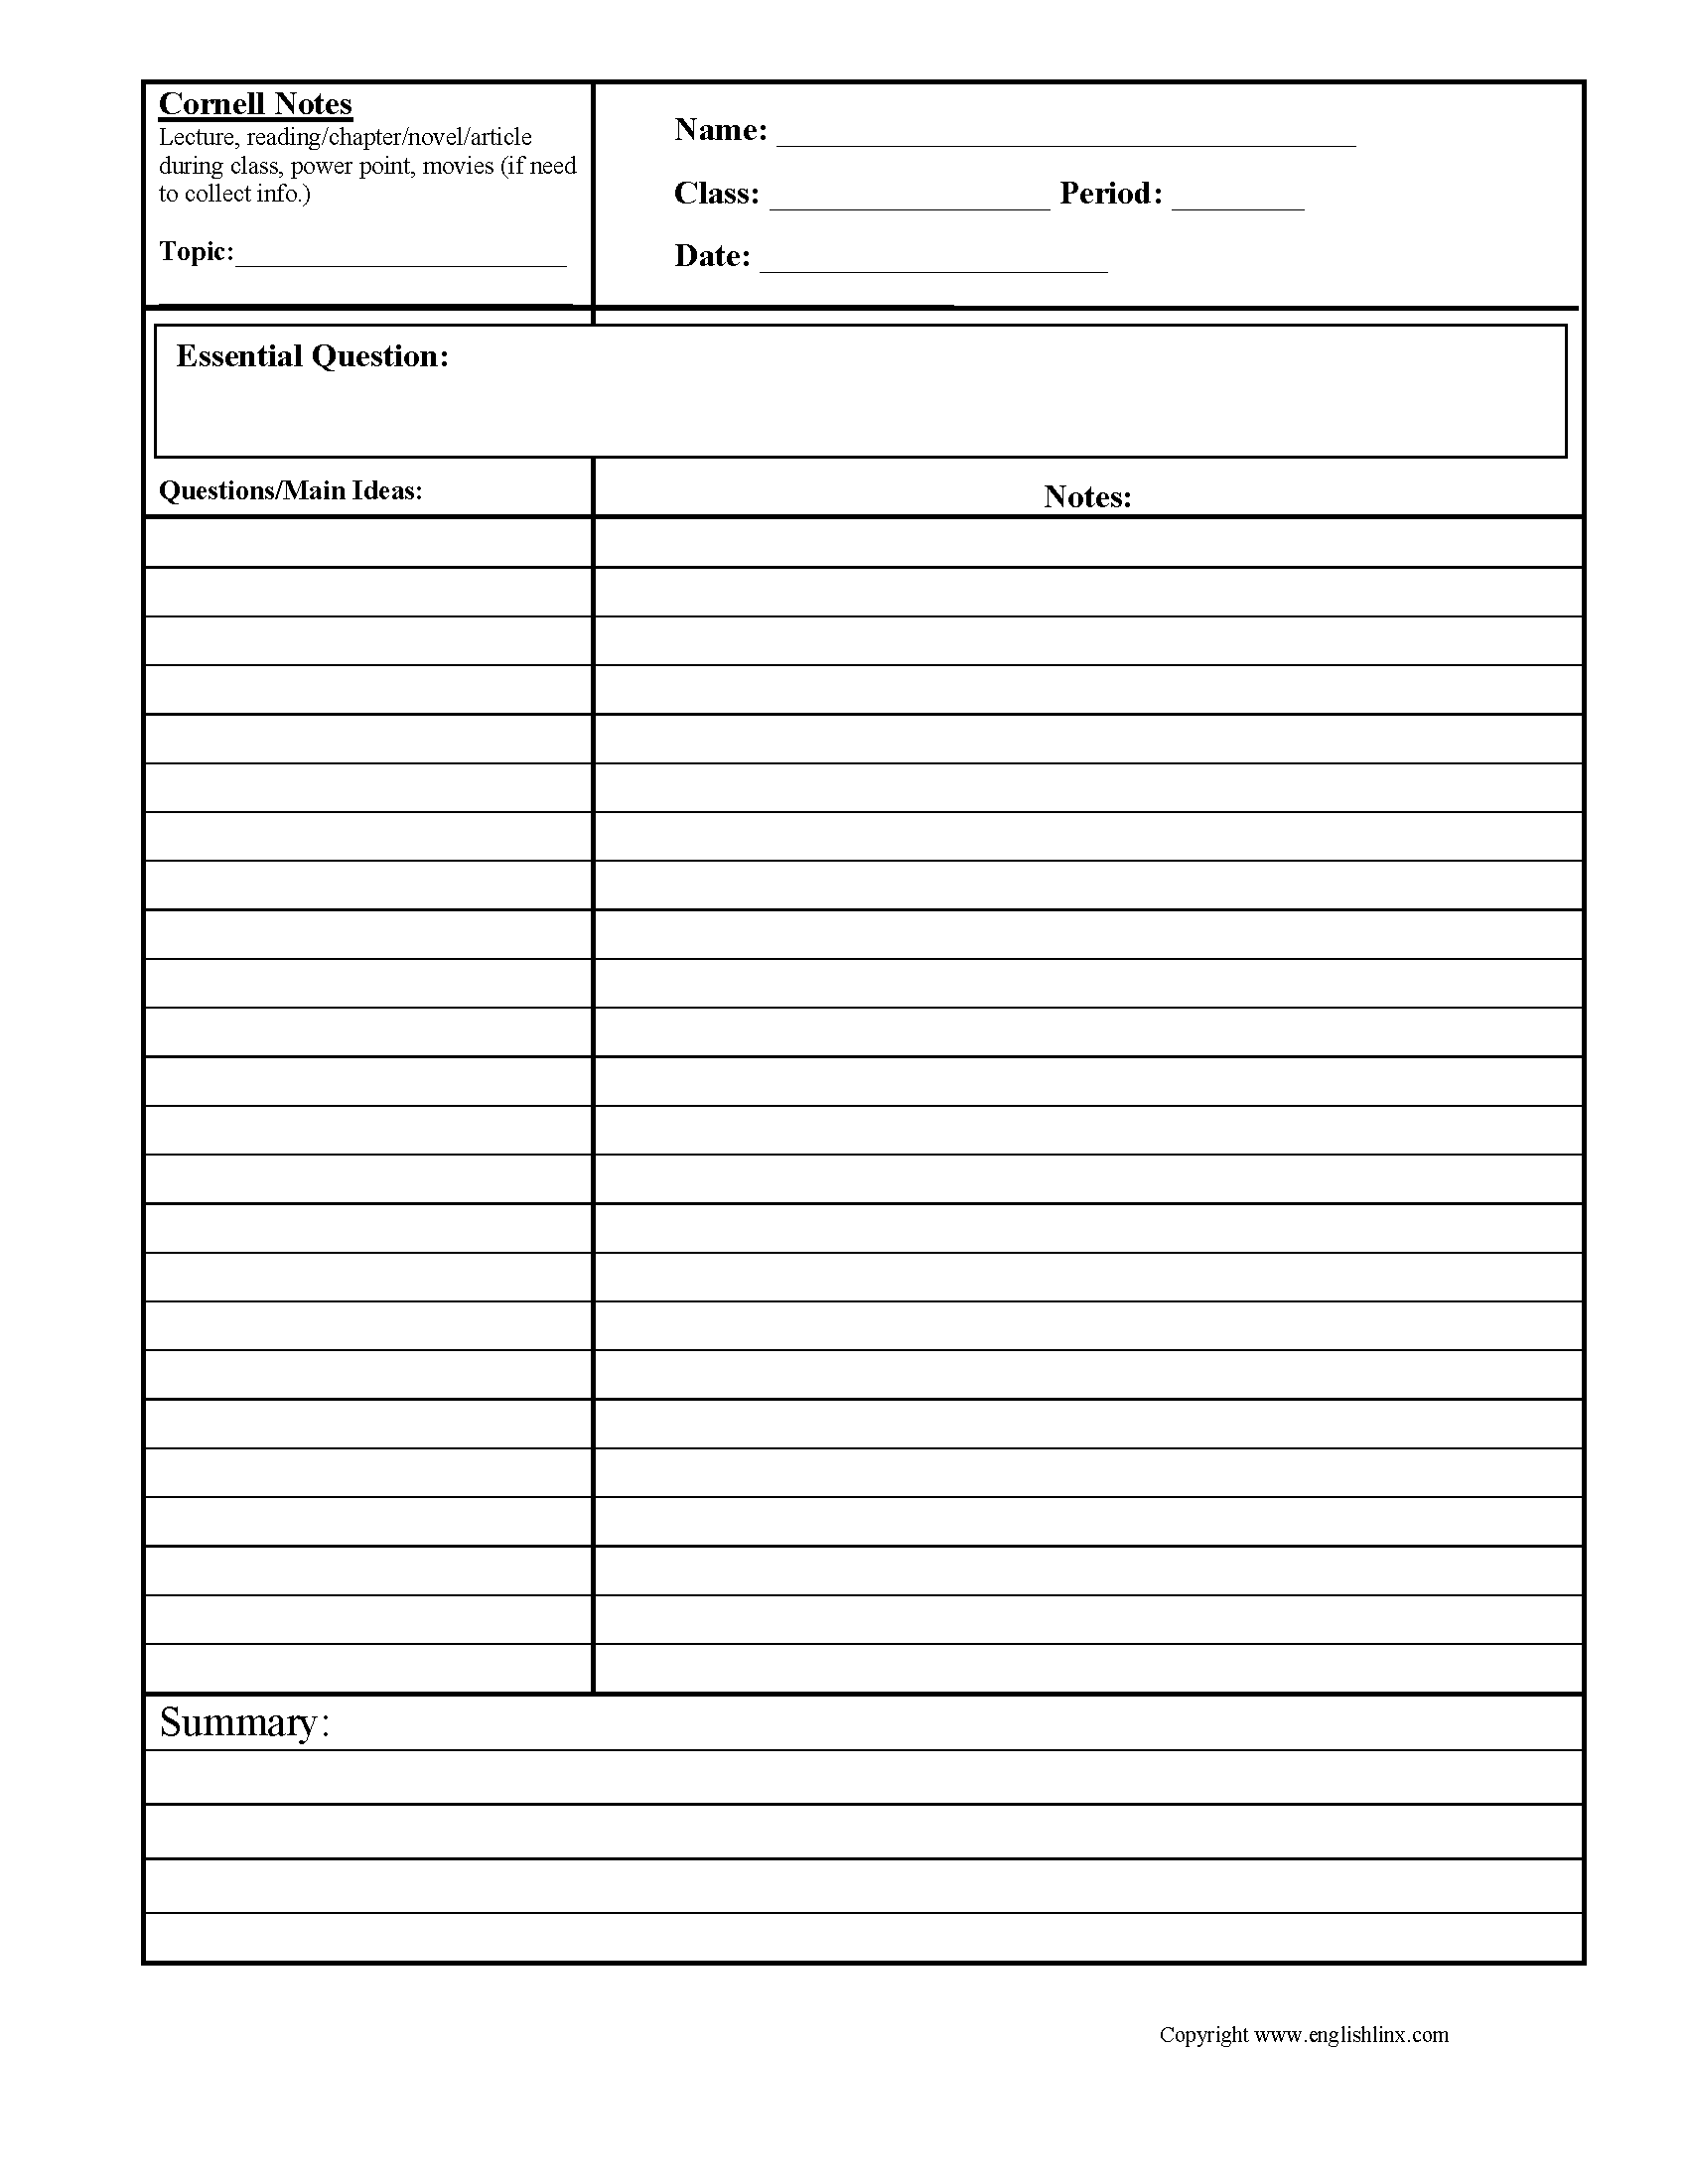 Cornell Notes Graphic Organizers Worksheet